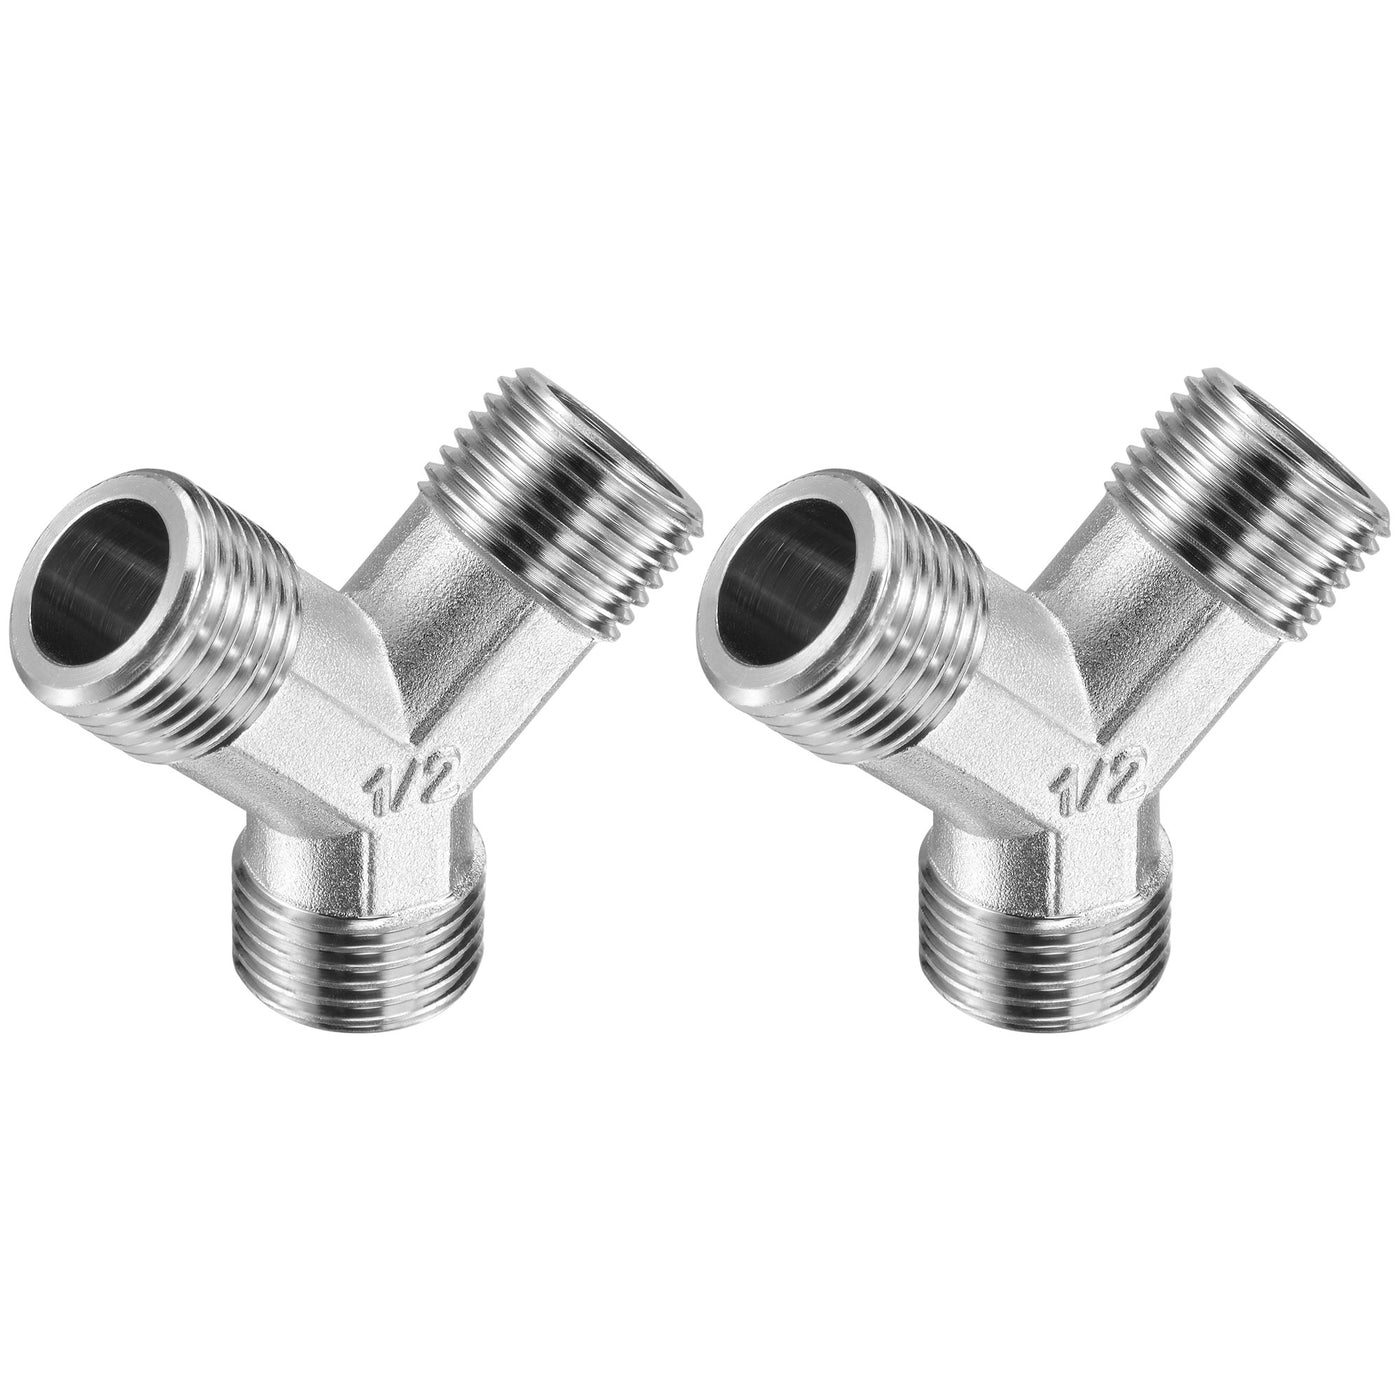 uxcell Uxcell Pipe Fitting G1/2 Male Thread Y Shape 3 Way Wye Hose Connector Adapter, Nickel-Plated Copper 2pcs